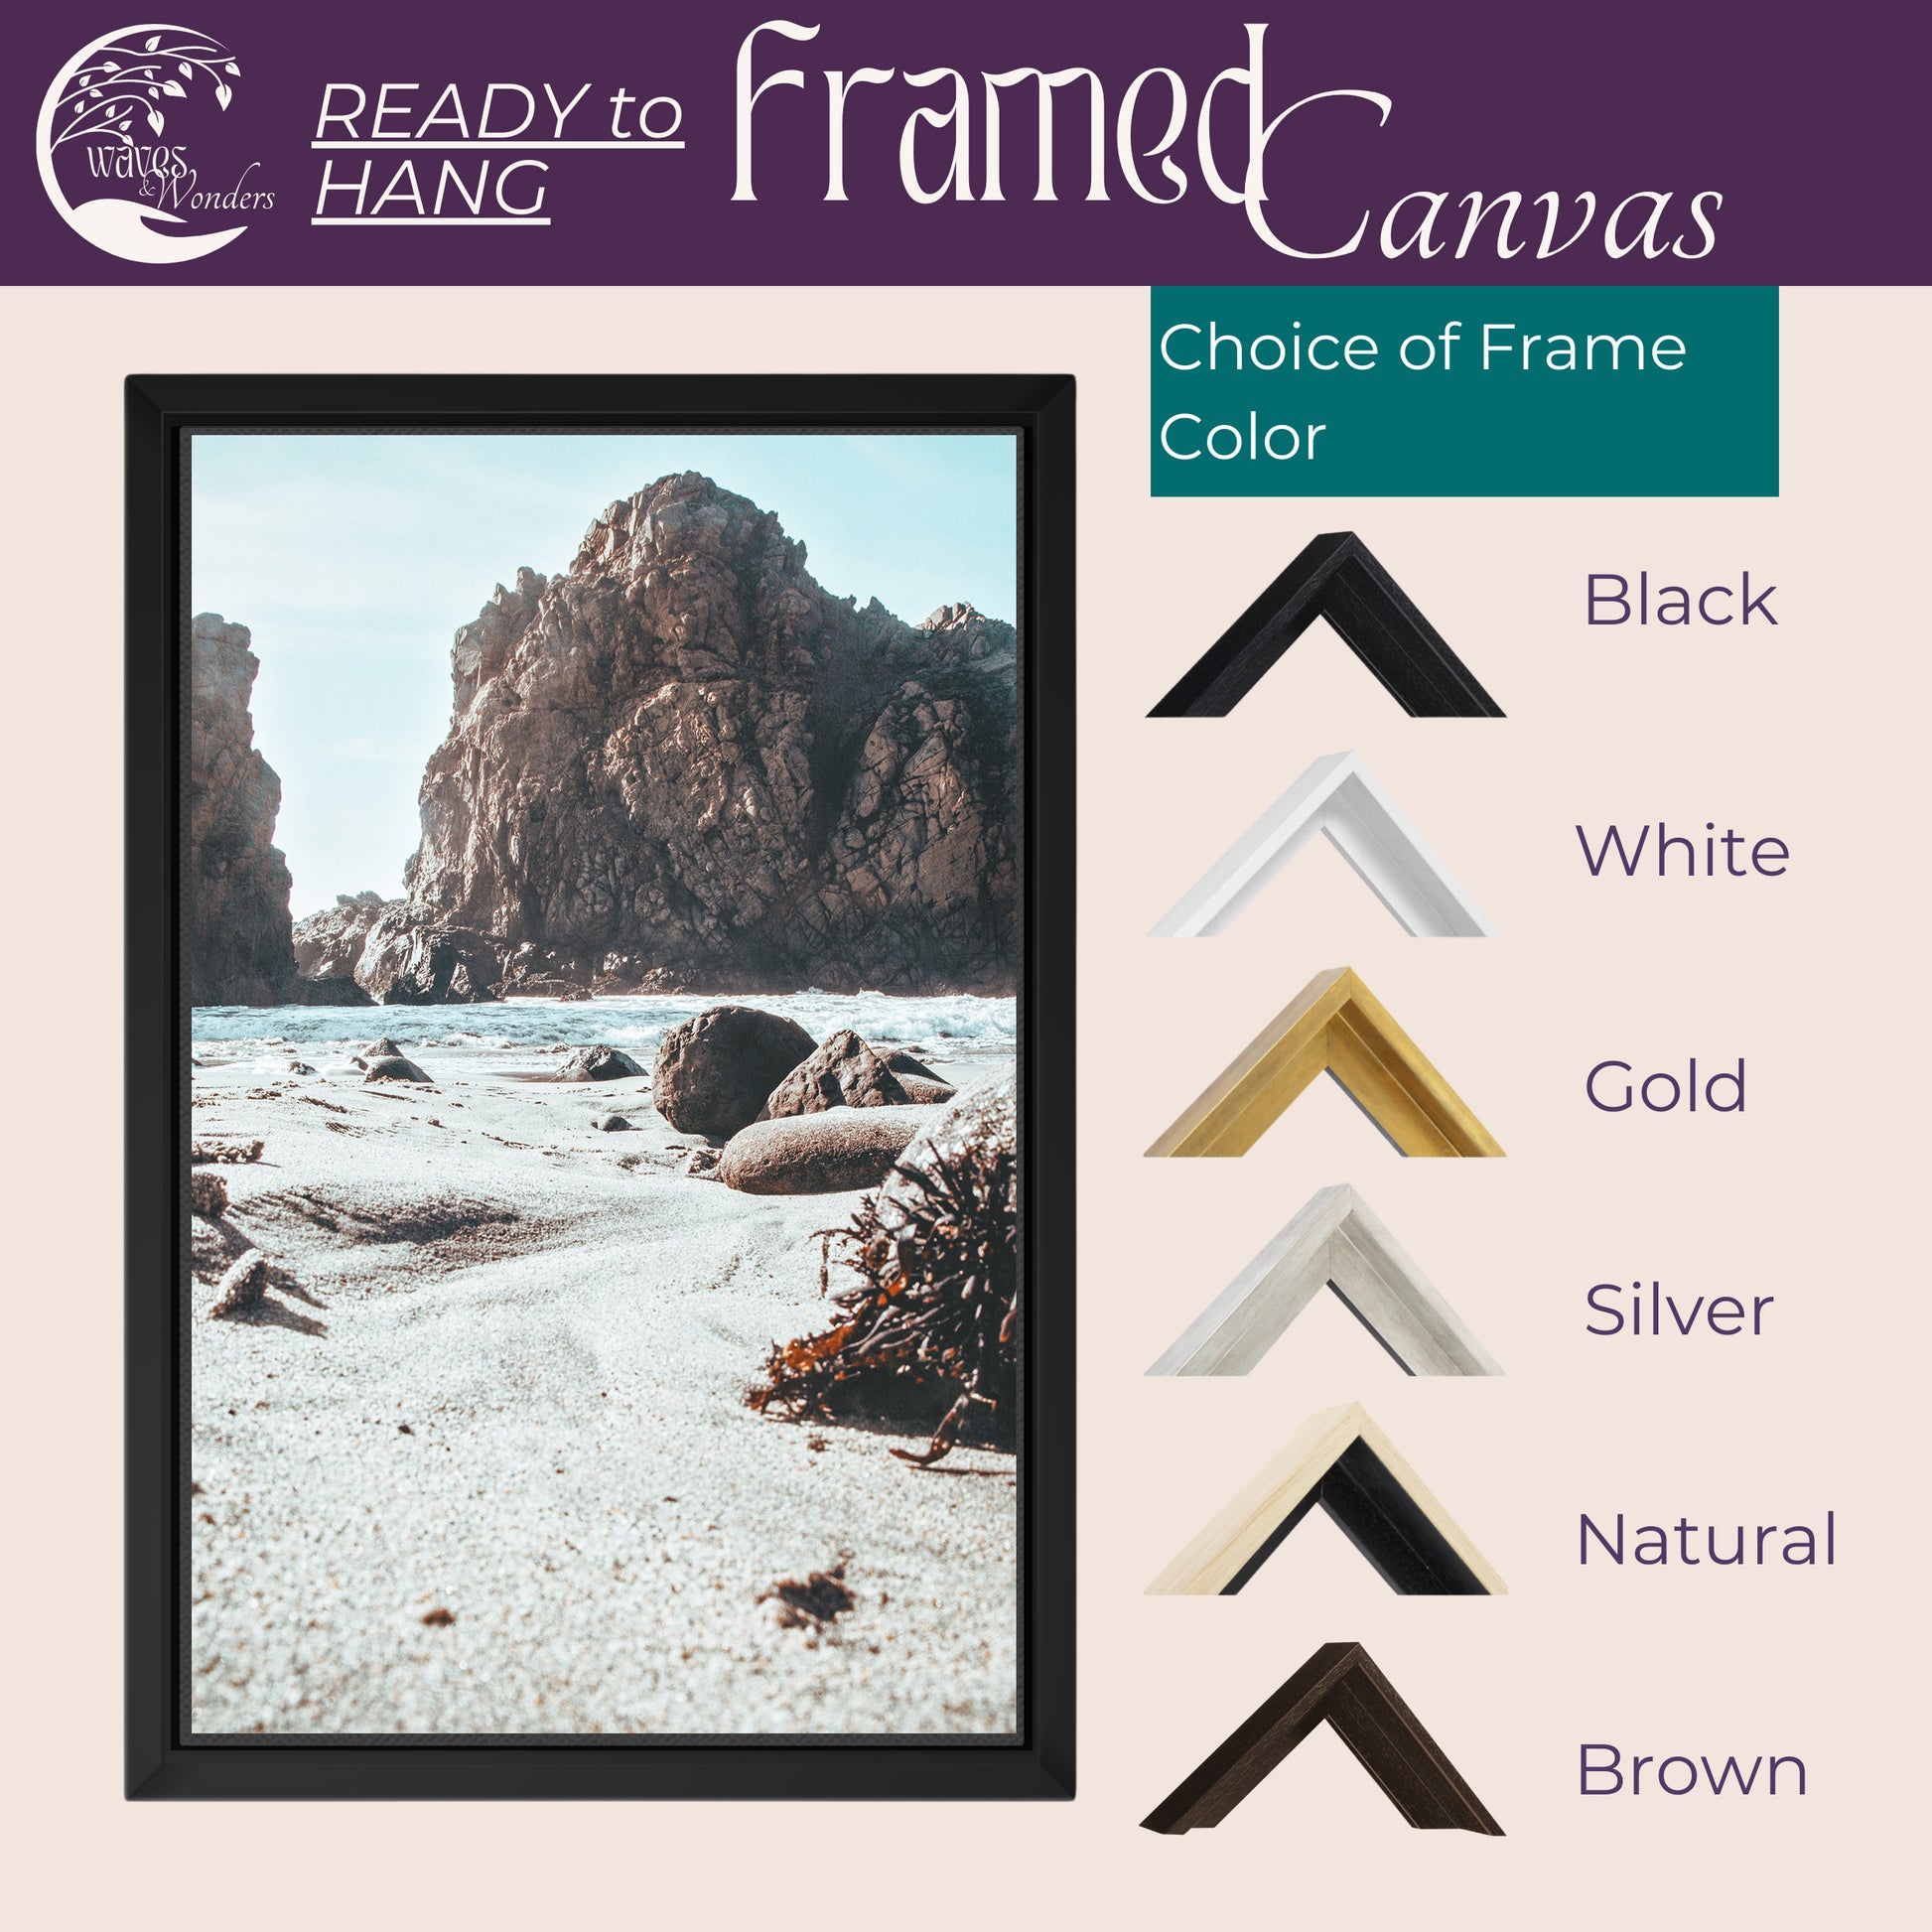 a picture of a frame with different colors of frames